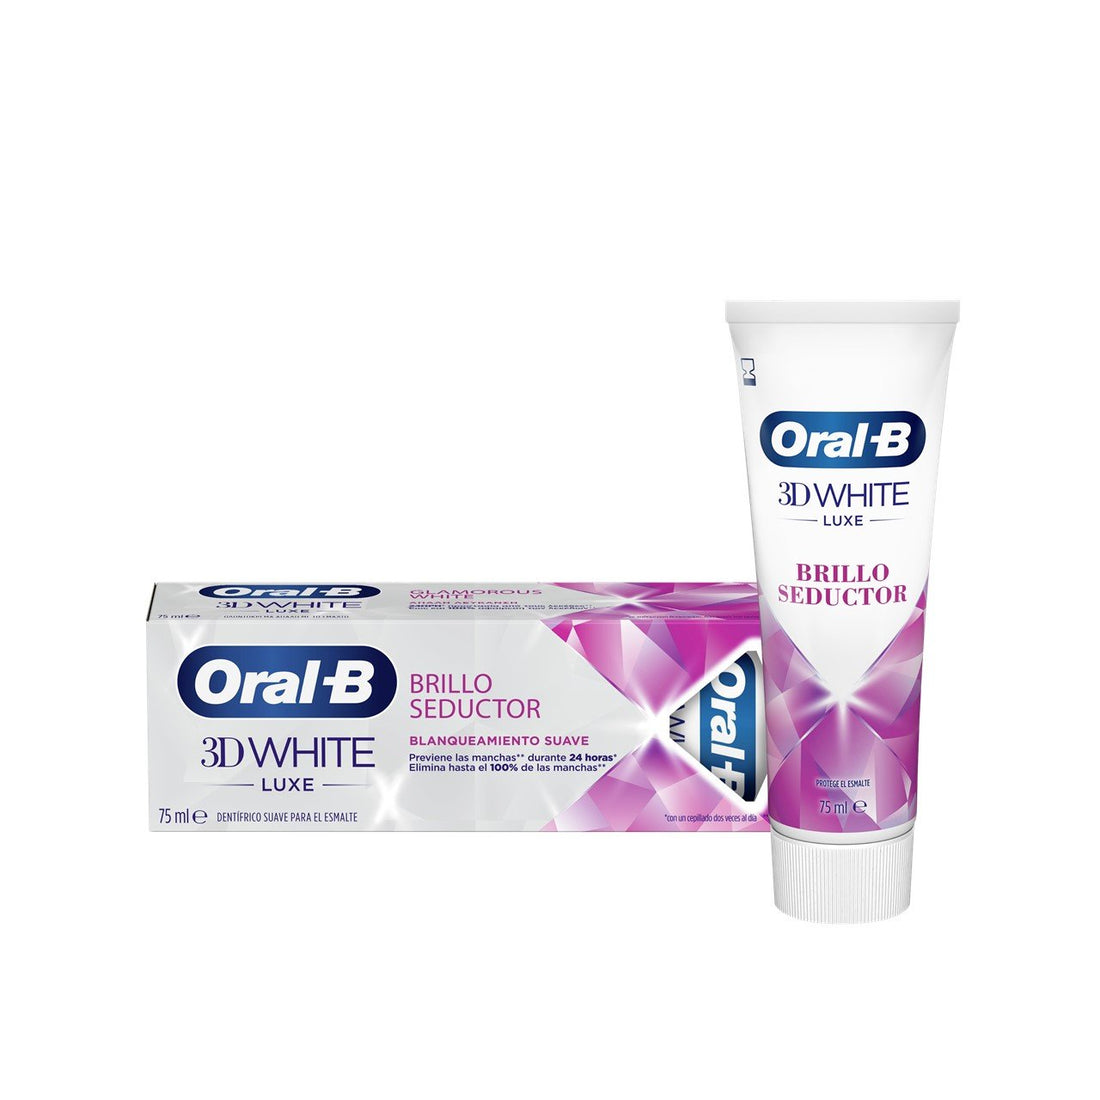 Oral-B 3D White Luxe Glamorous Dentifrice Blanchissant 75 ml